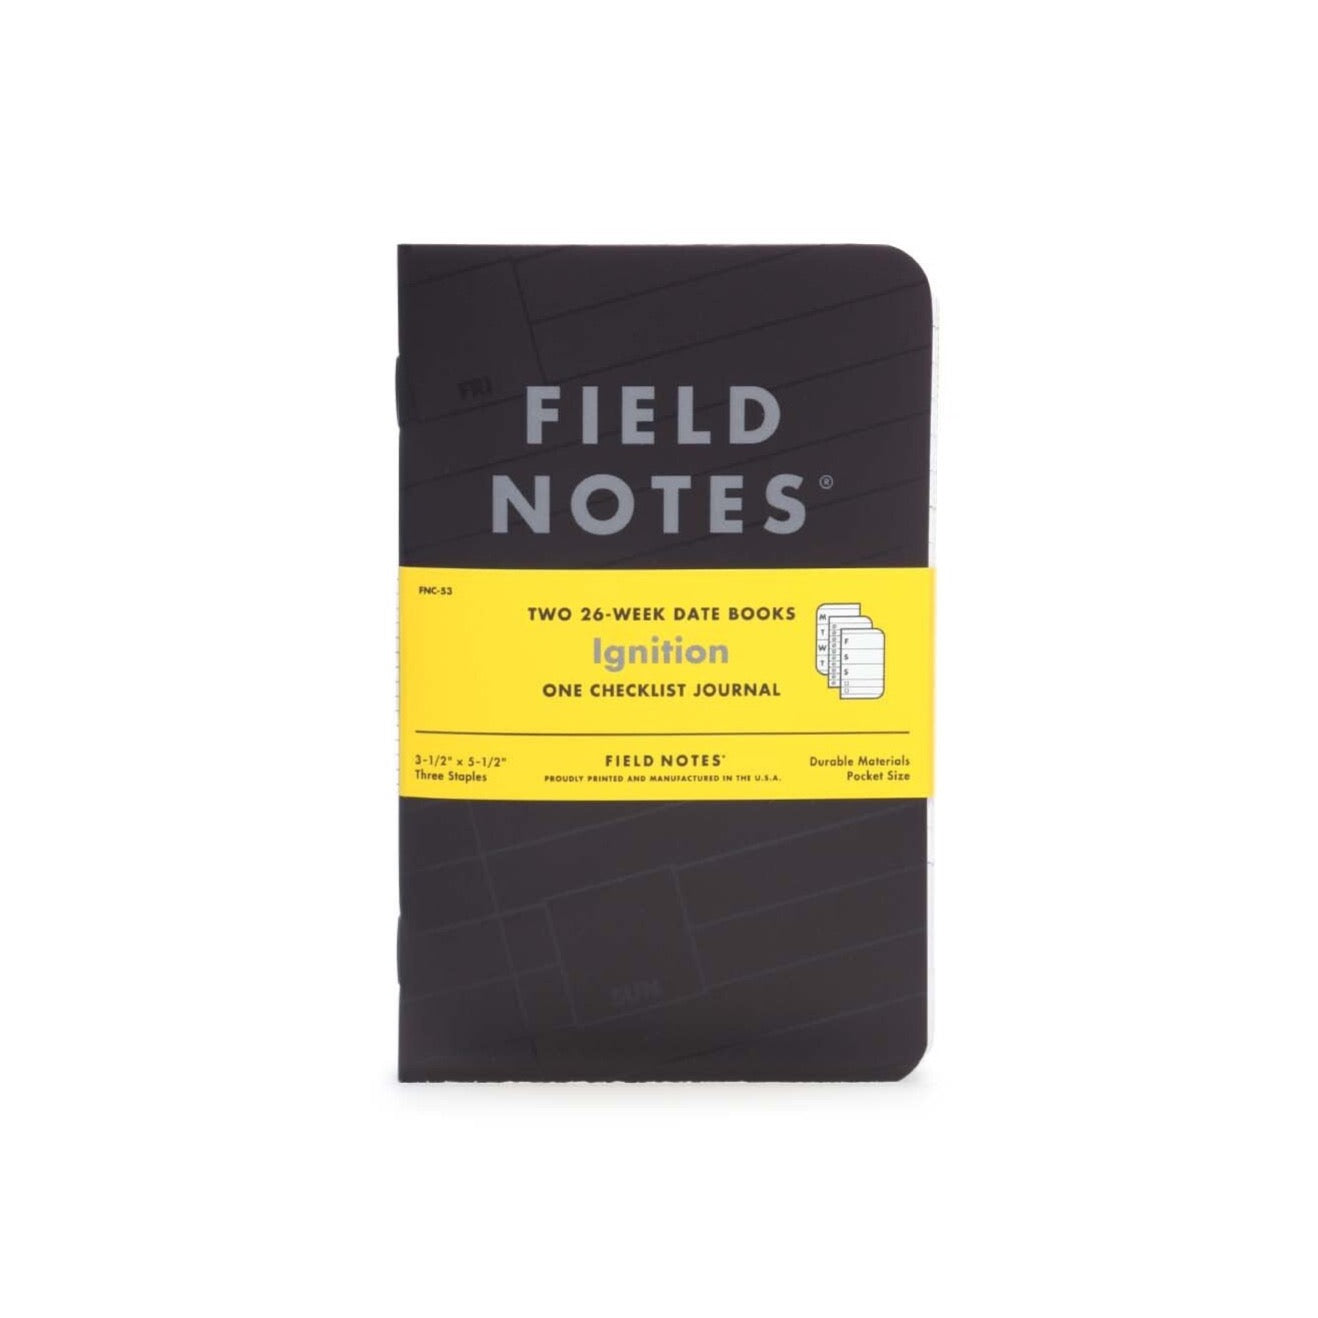 Field Notes: Ignition - yearly planner and checklists